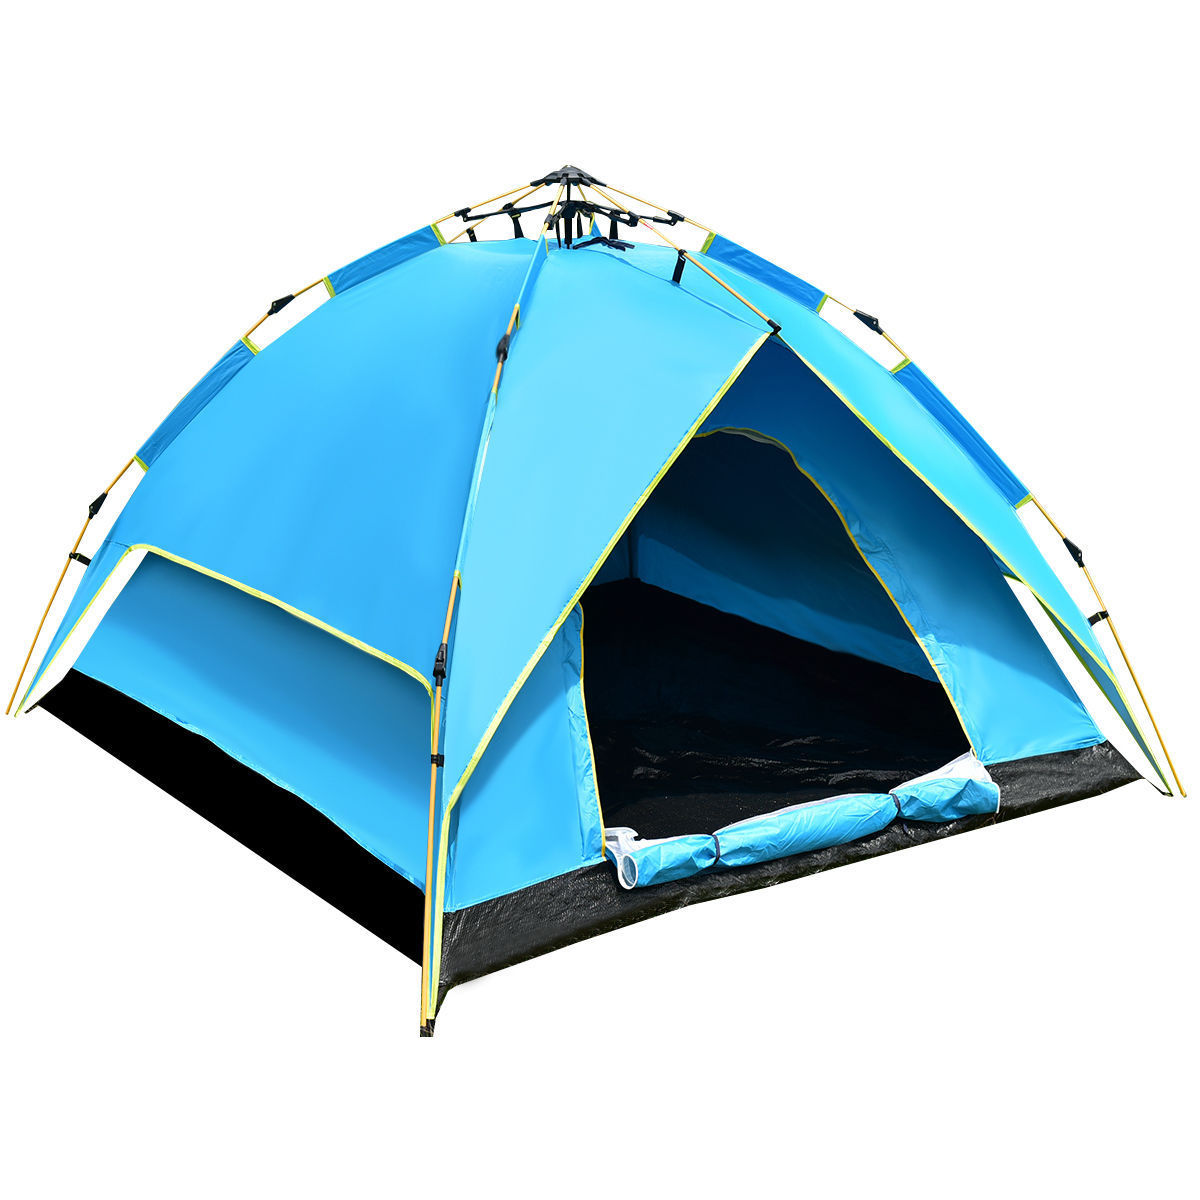 Dome-style 3-season 4-person camping tent